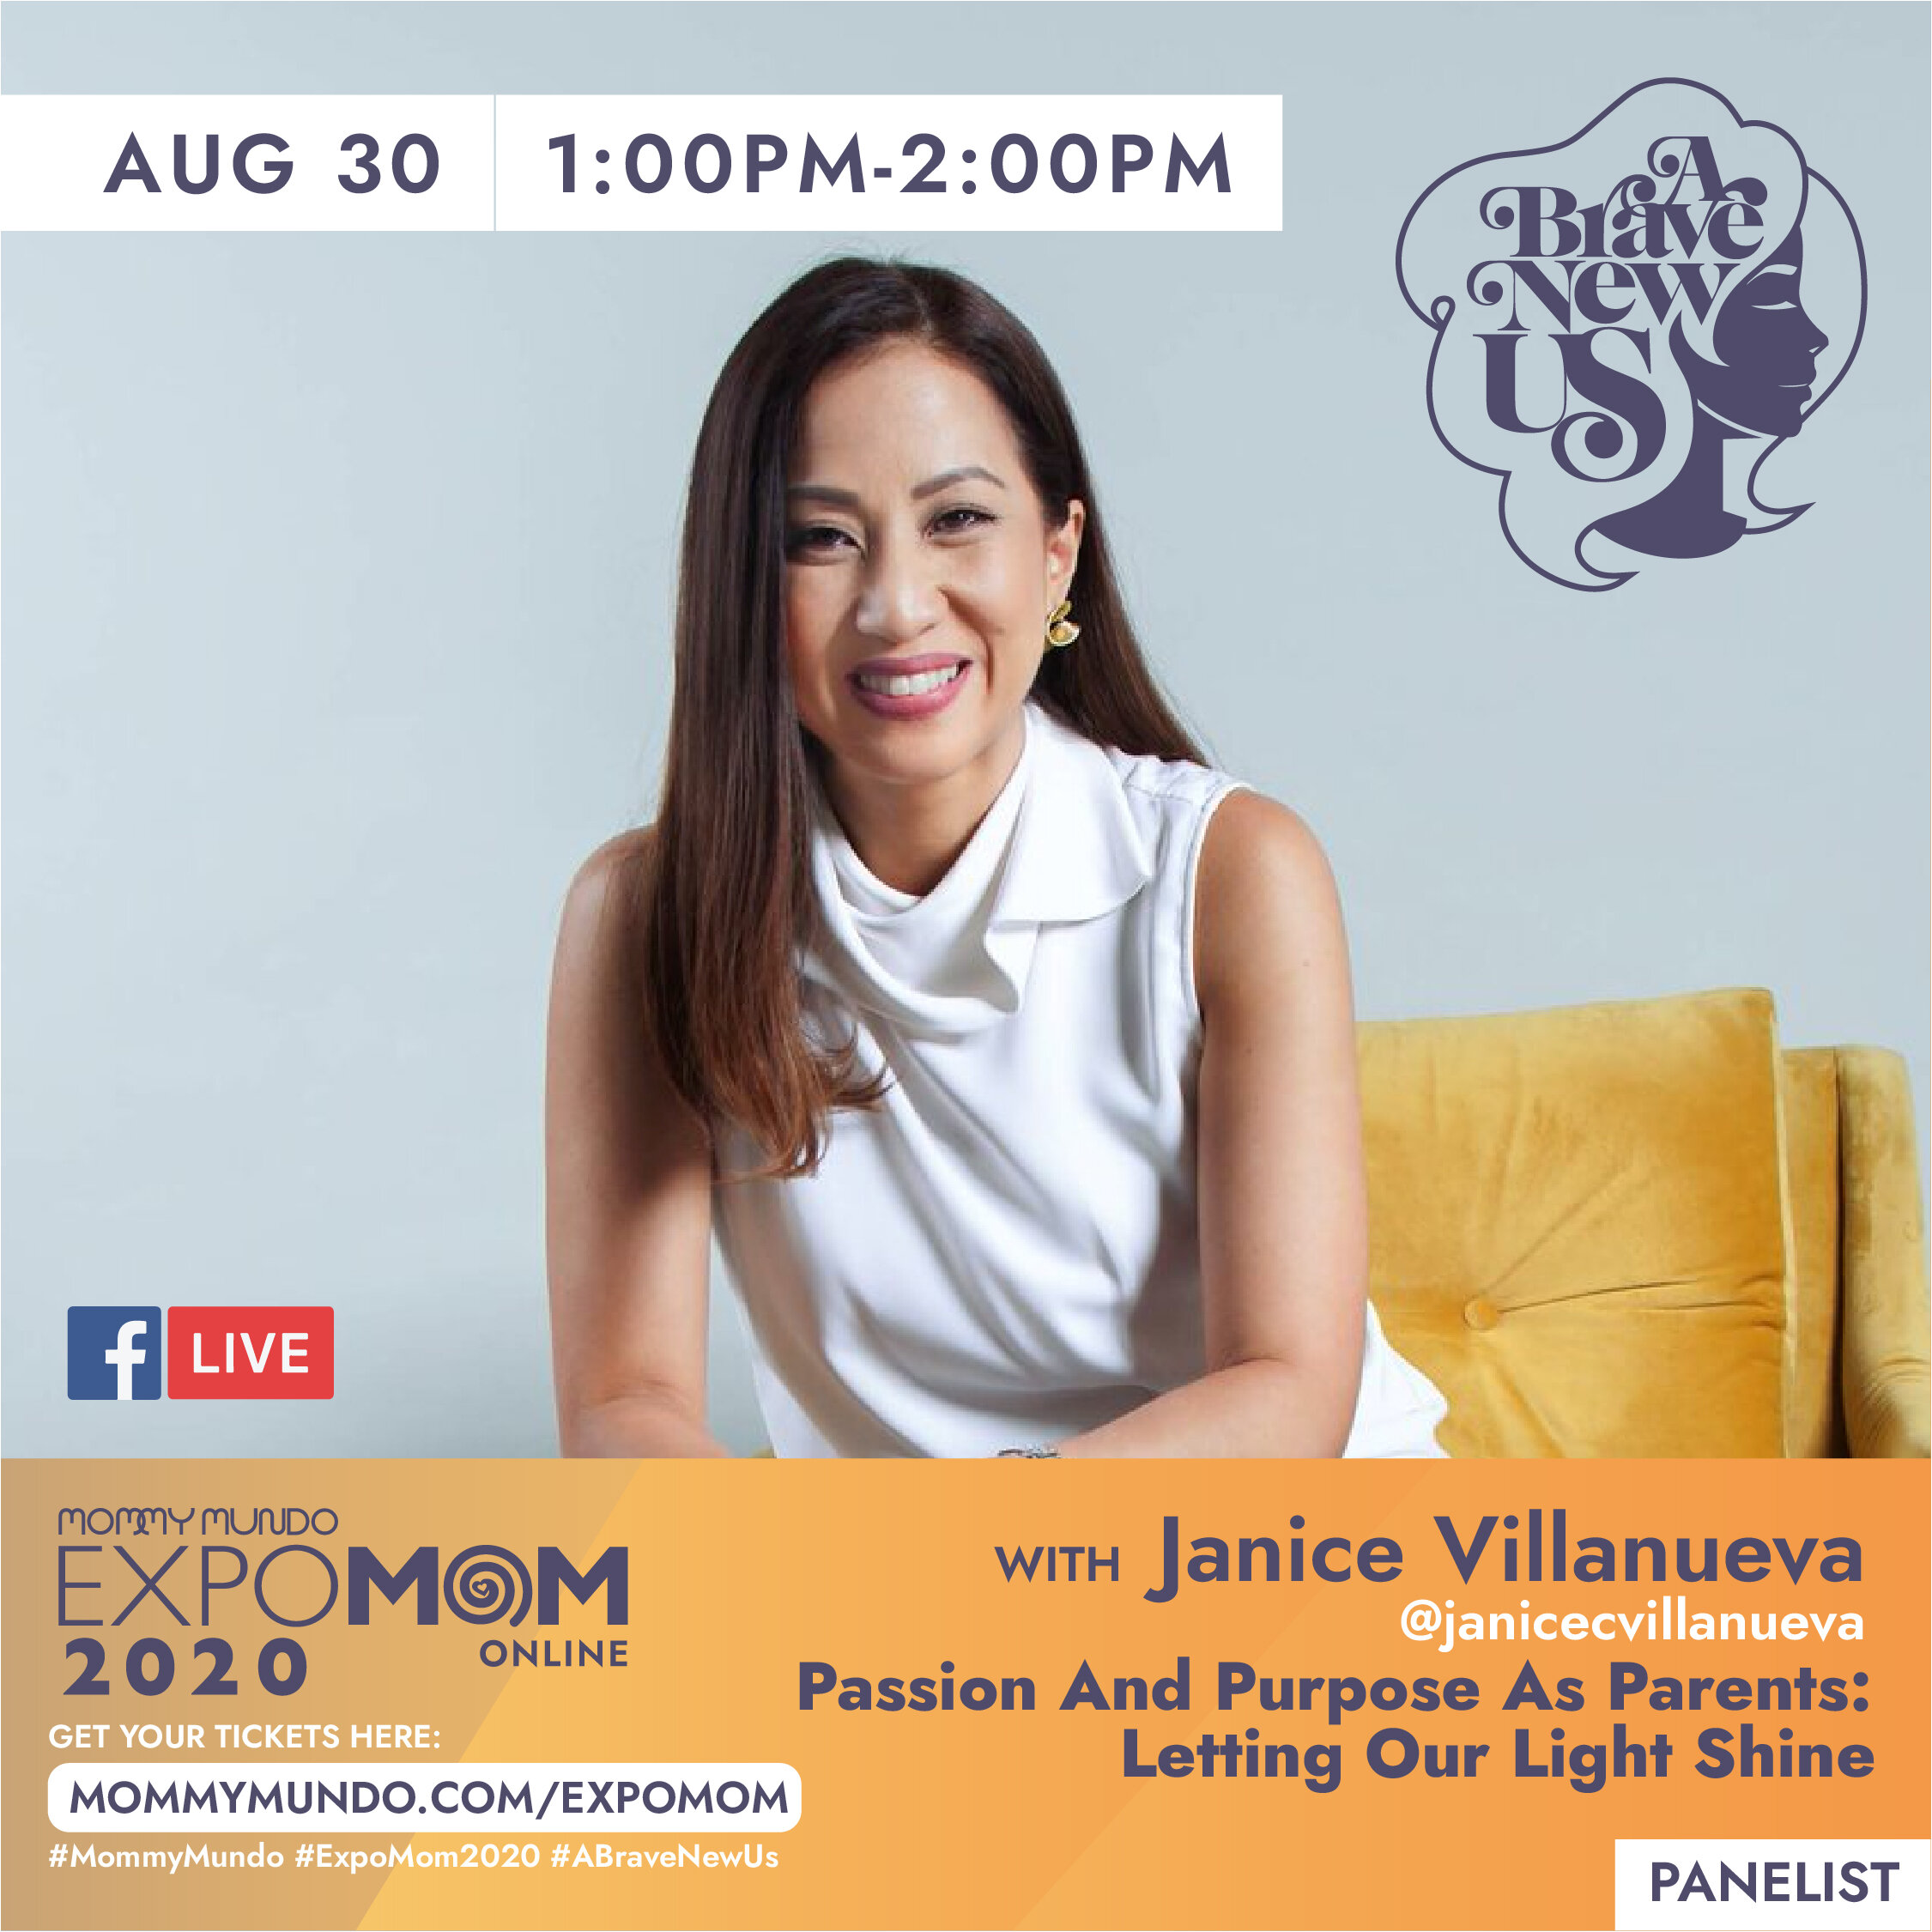  Founder of Mommy Mundo, Janice Villanueva has been a long time advocate of healthy pregnancy, breastfeeding, active parenting, self-care, and mompreneurship. 